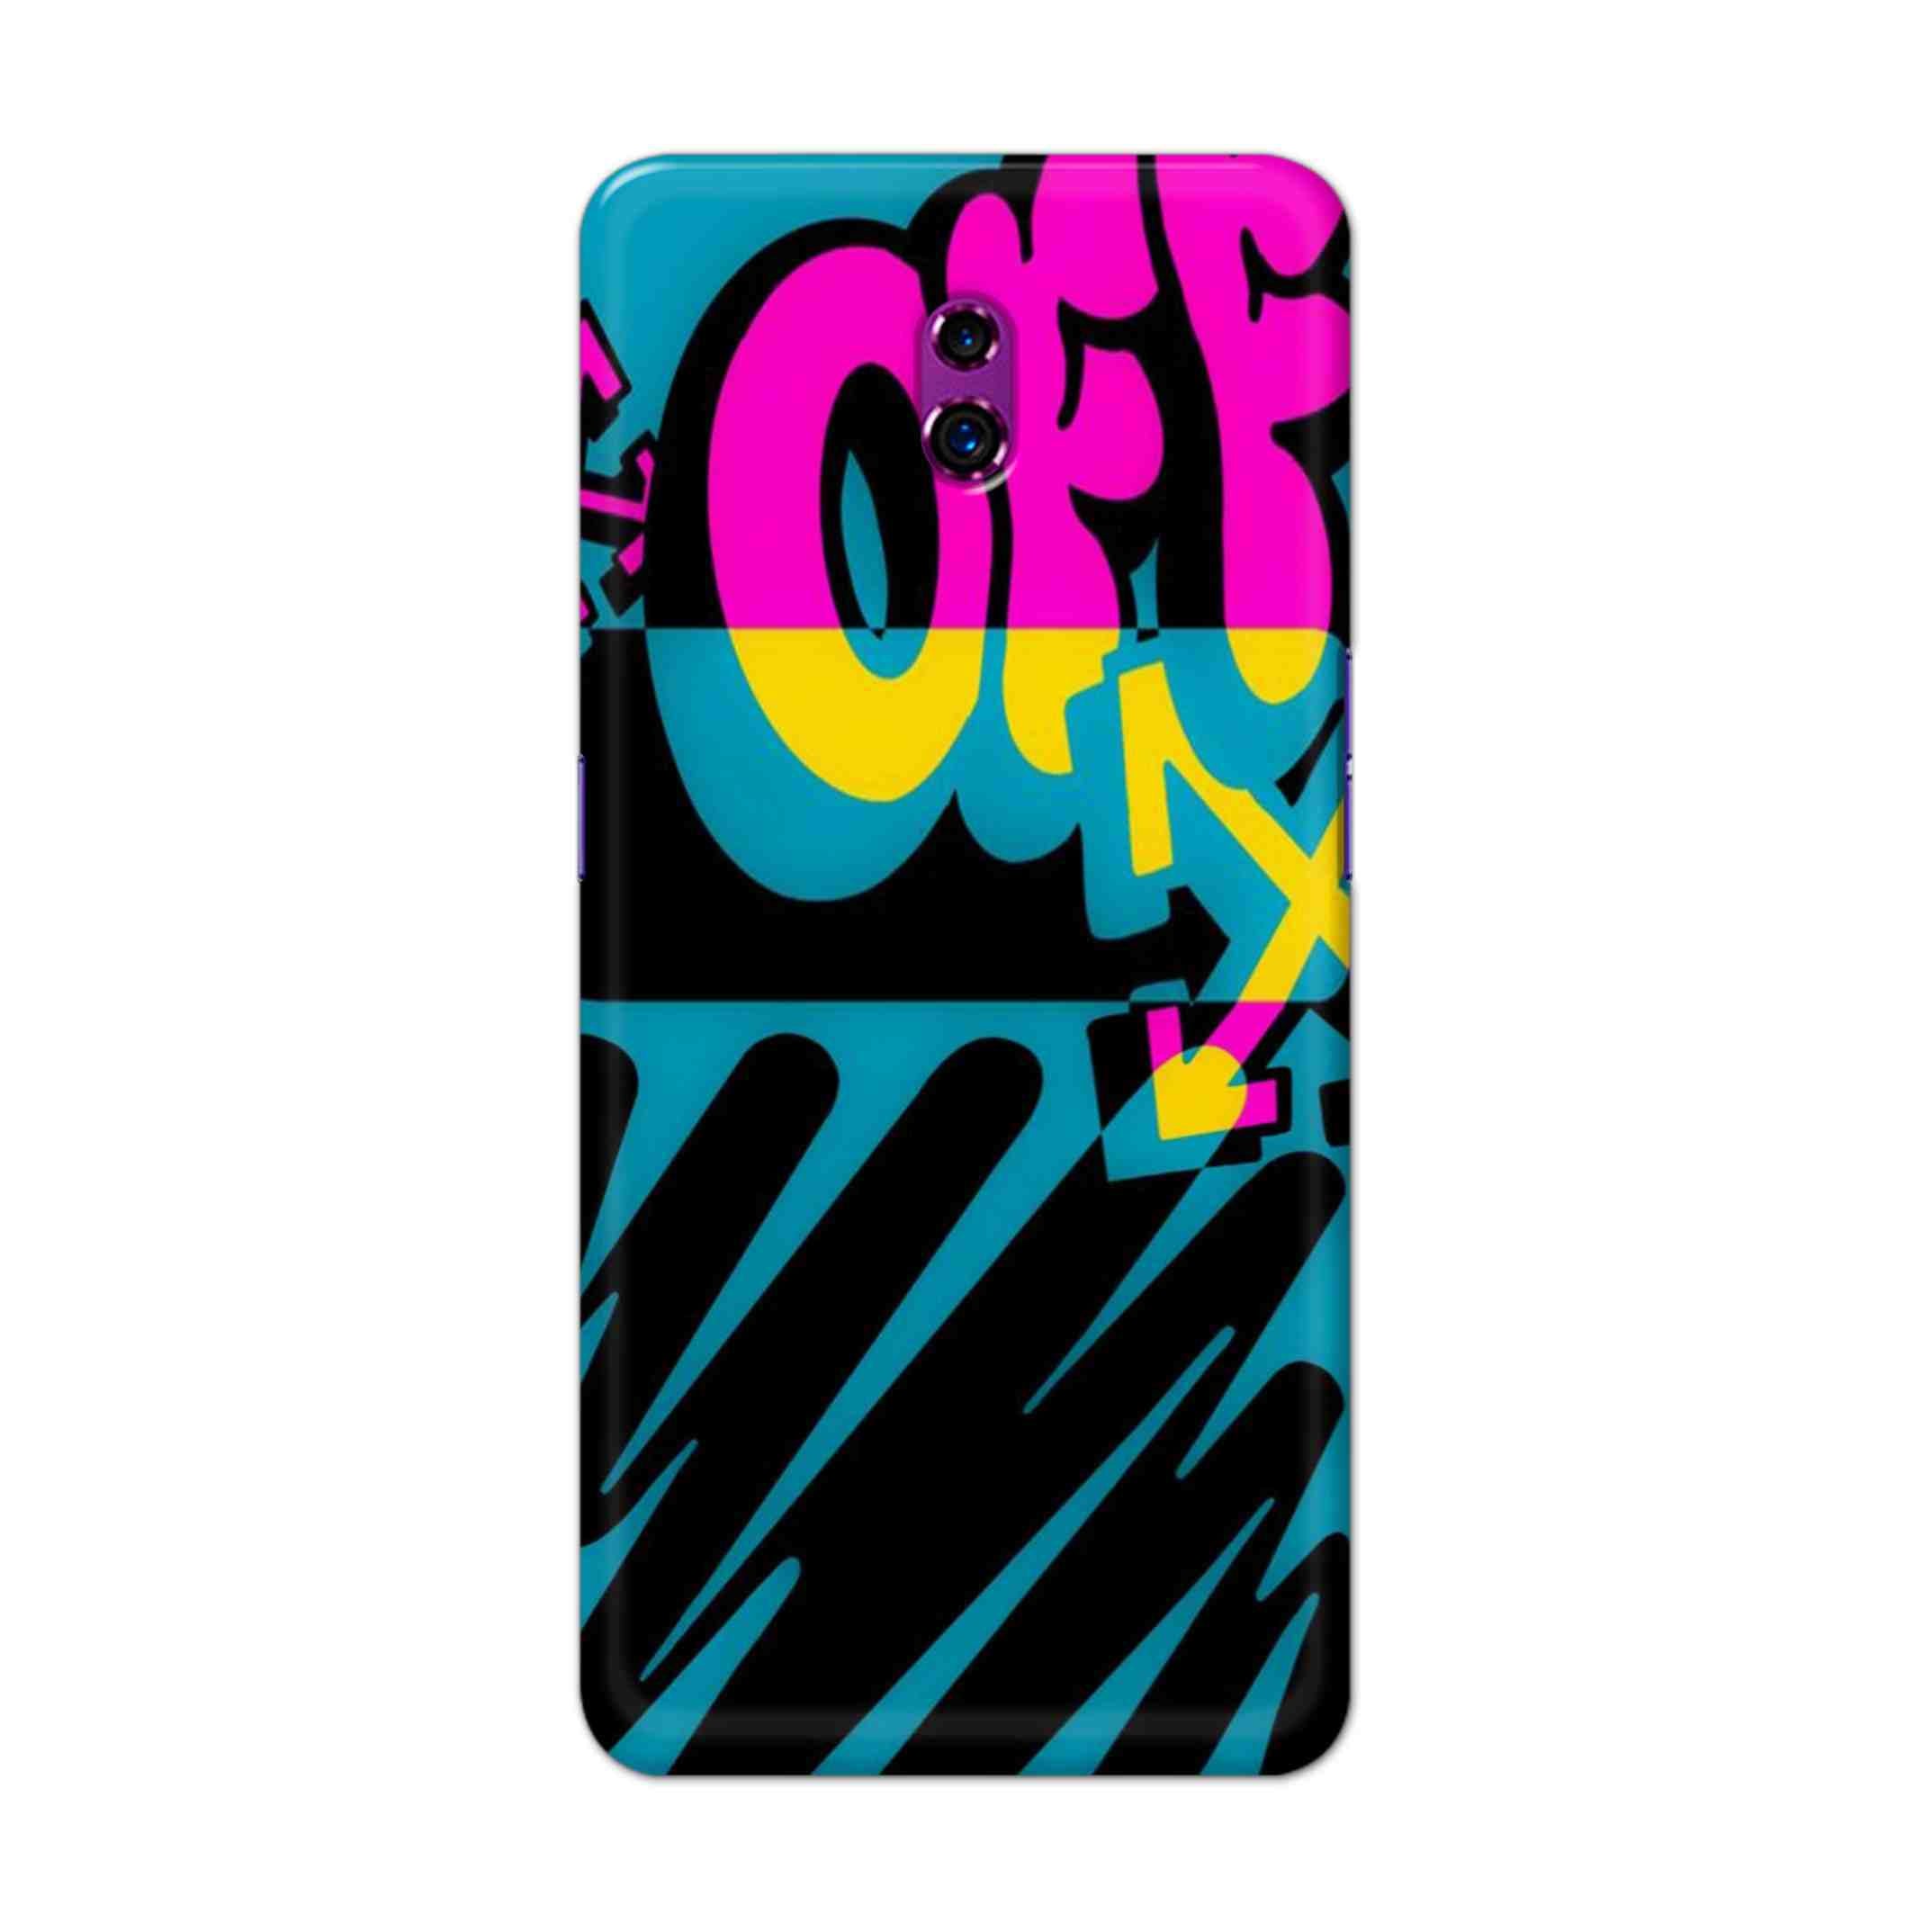 Buy Off Hard Back Mobile Phone Case Cover For Oppo Reno Online